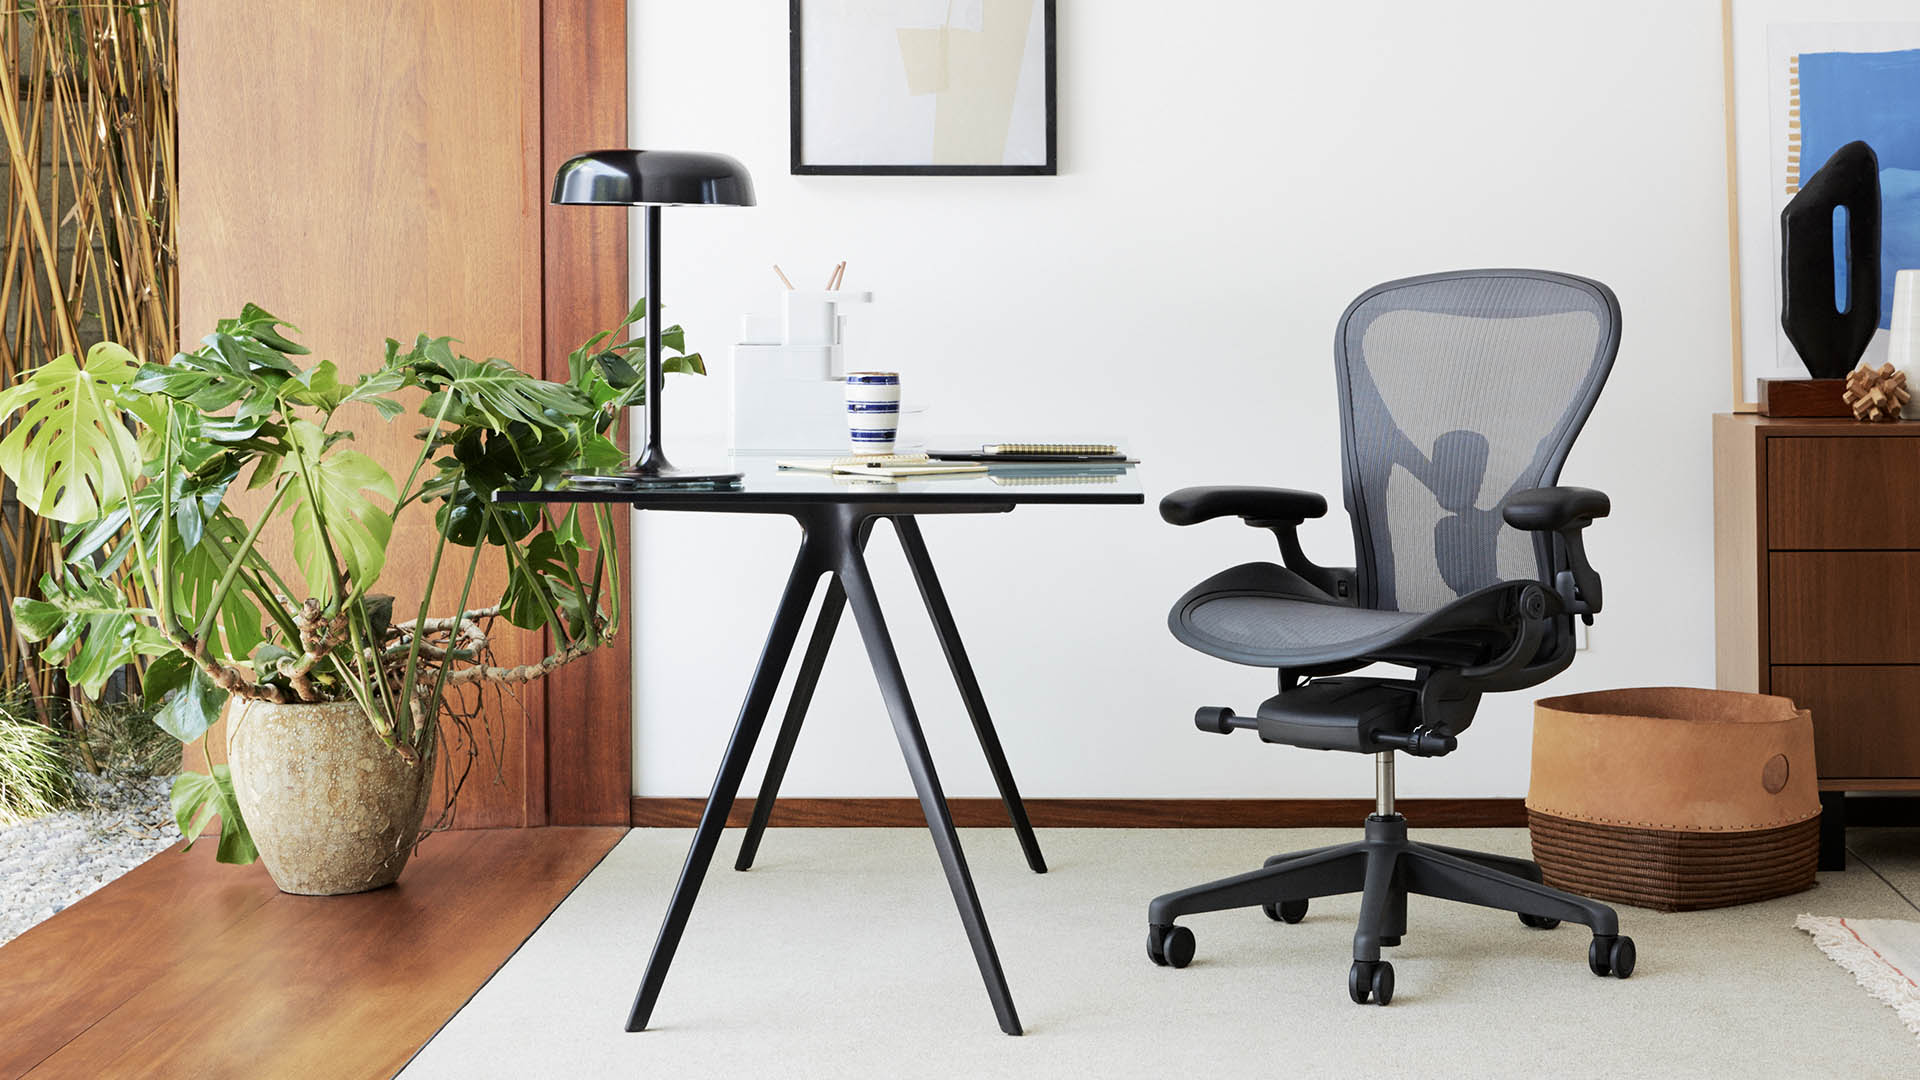  How to buy a Herman Miller Aeron Chair if you are Tall.